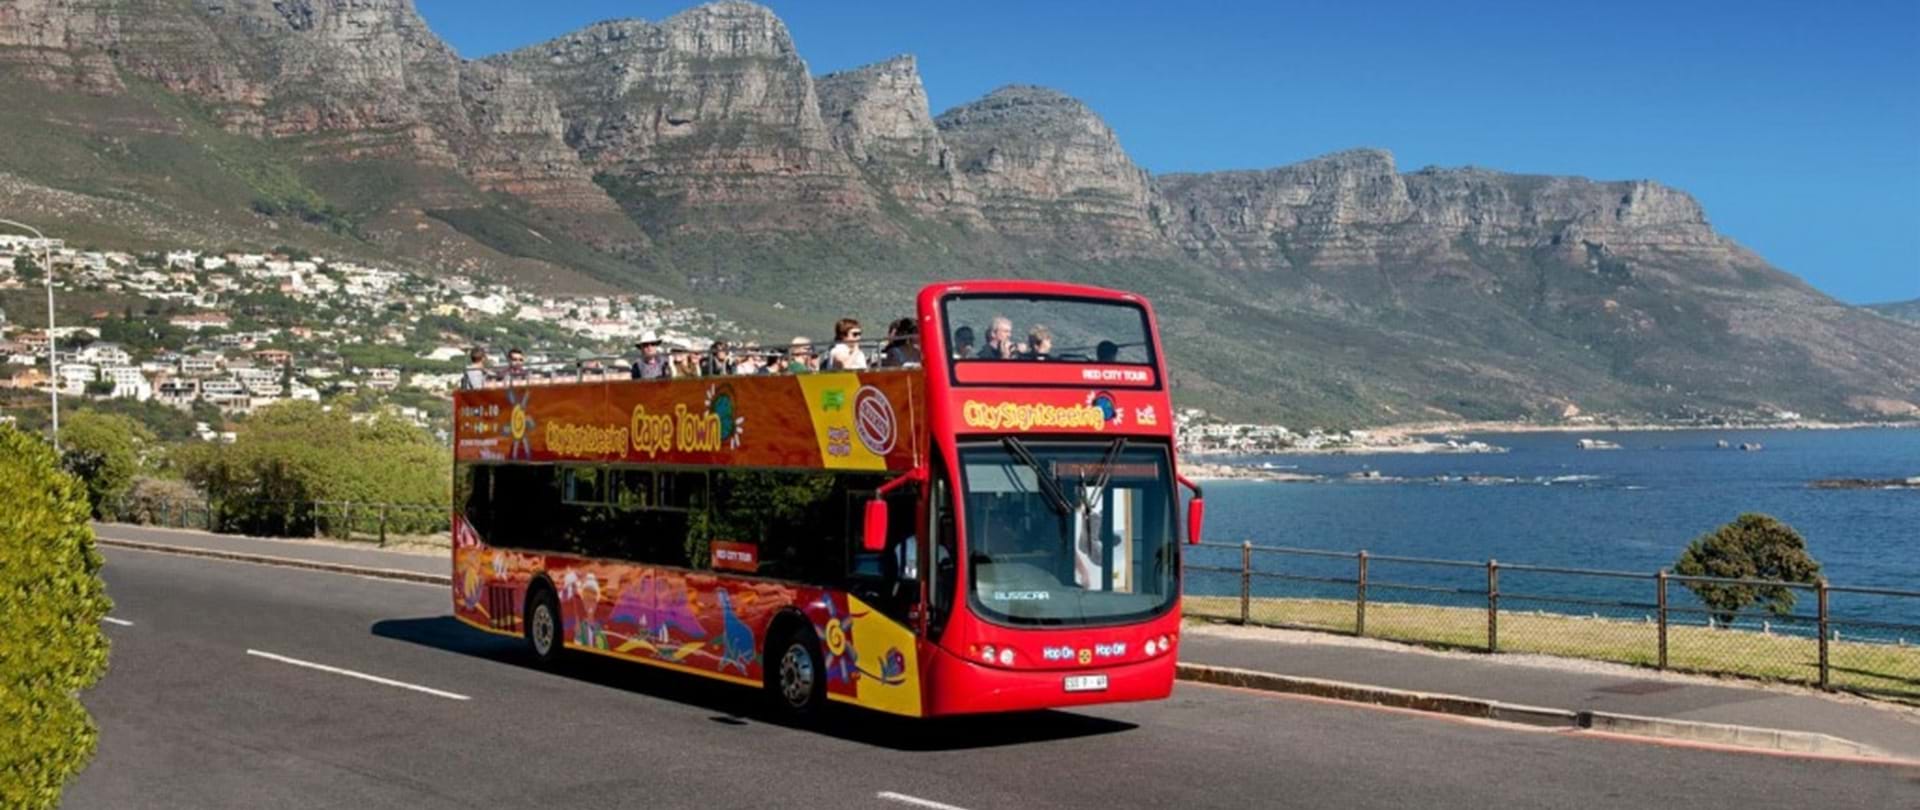 cape town daily tours